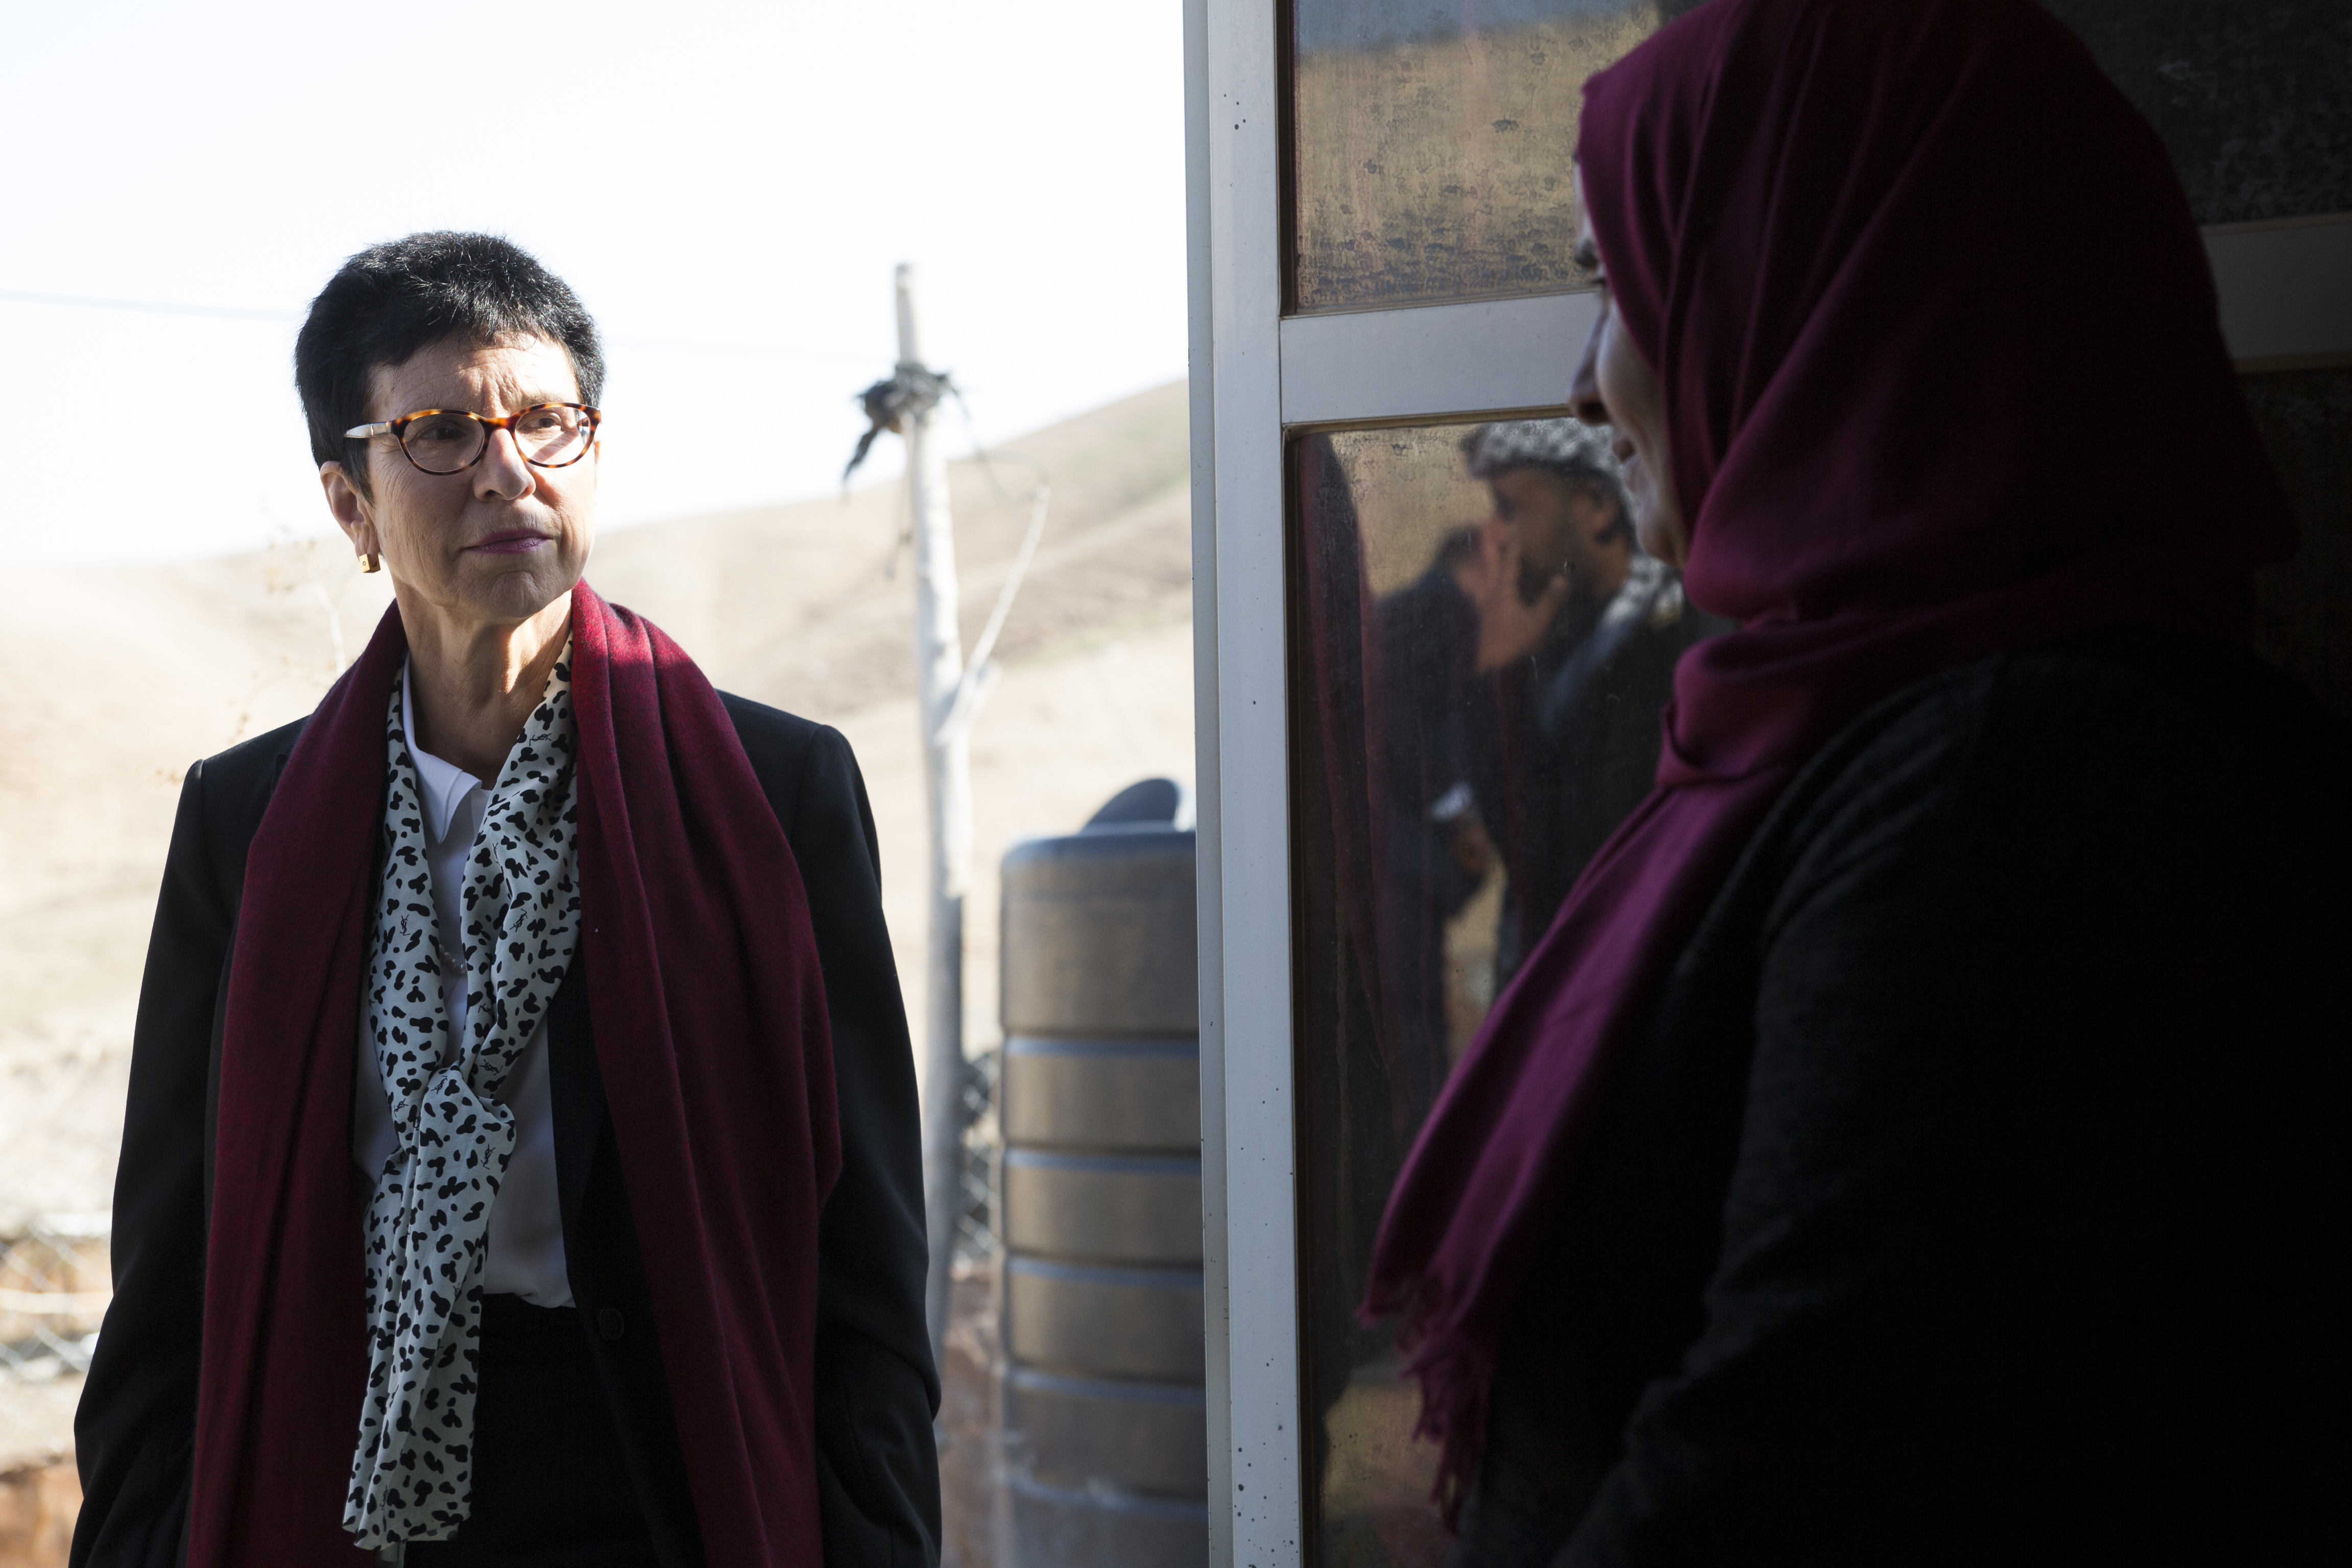 United Nations Assistant Secretary-General for Humanitarian Affairs and Deputy Emergency Relief Coordinator, Ursula Mueller, in the Palestinian Bedouin community of Sateh al Bahr, in the central West Bank, 14 January 2020. Photo by Ahed Izhiman